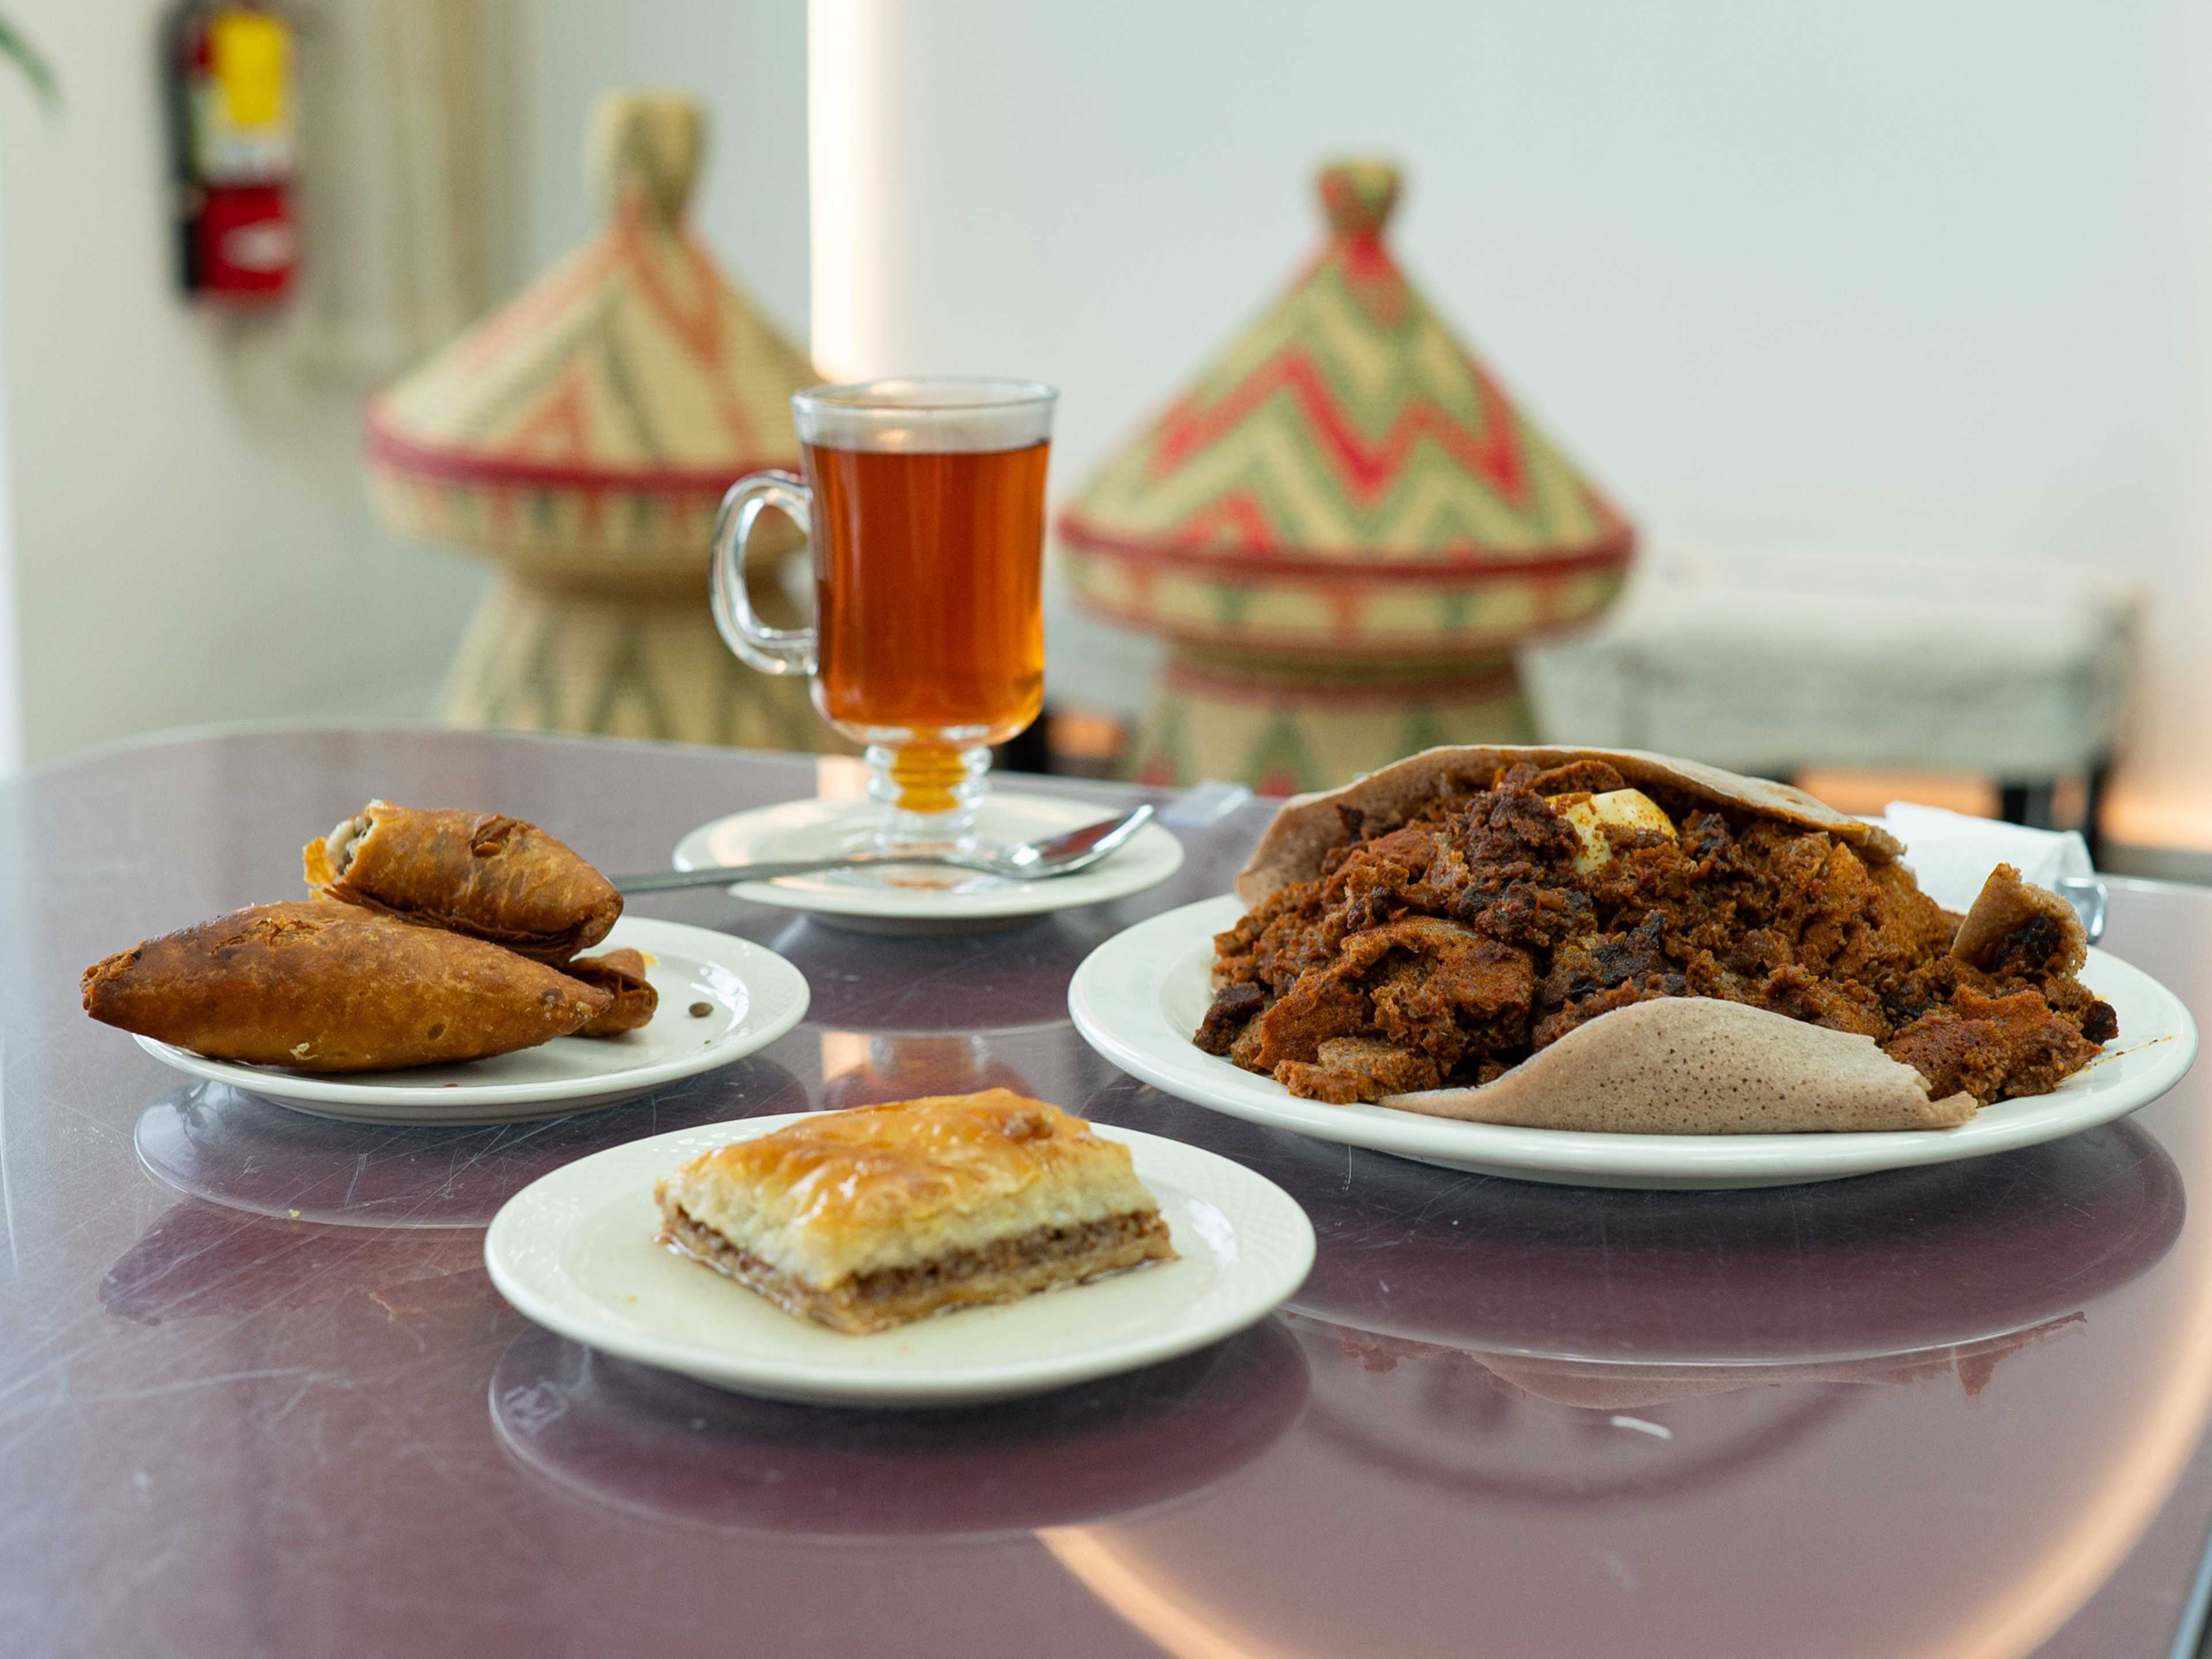 Spread of Ethiopian dishes and tea from Abem.